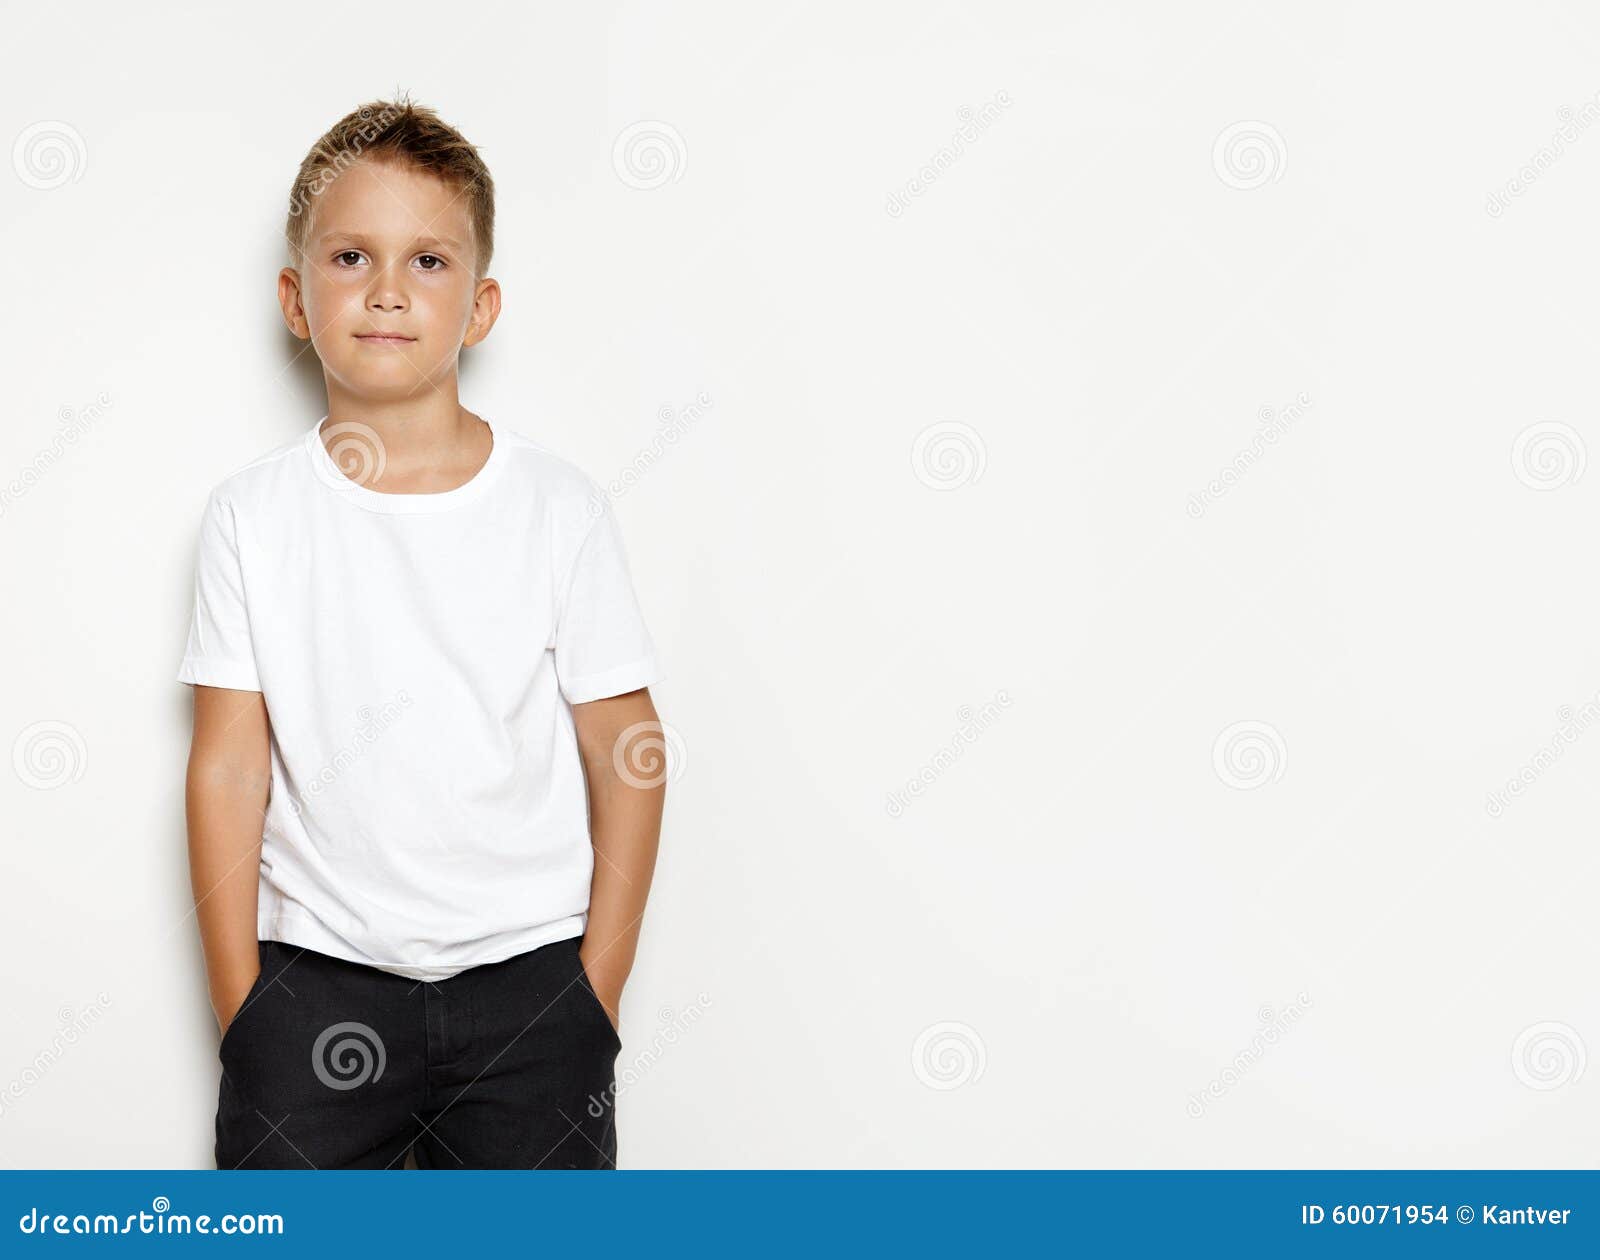 Download 181 Kid Tshirt Mock Up Photos Free Royalty Free Stock Photos From Dreamstime